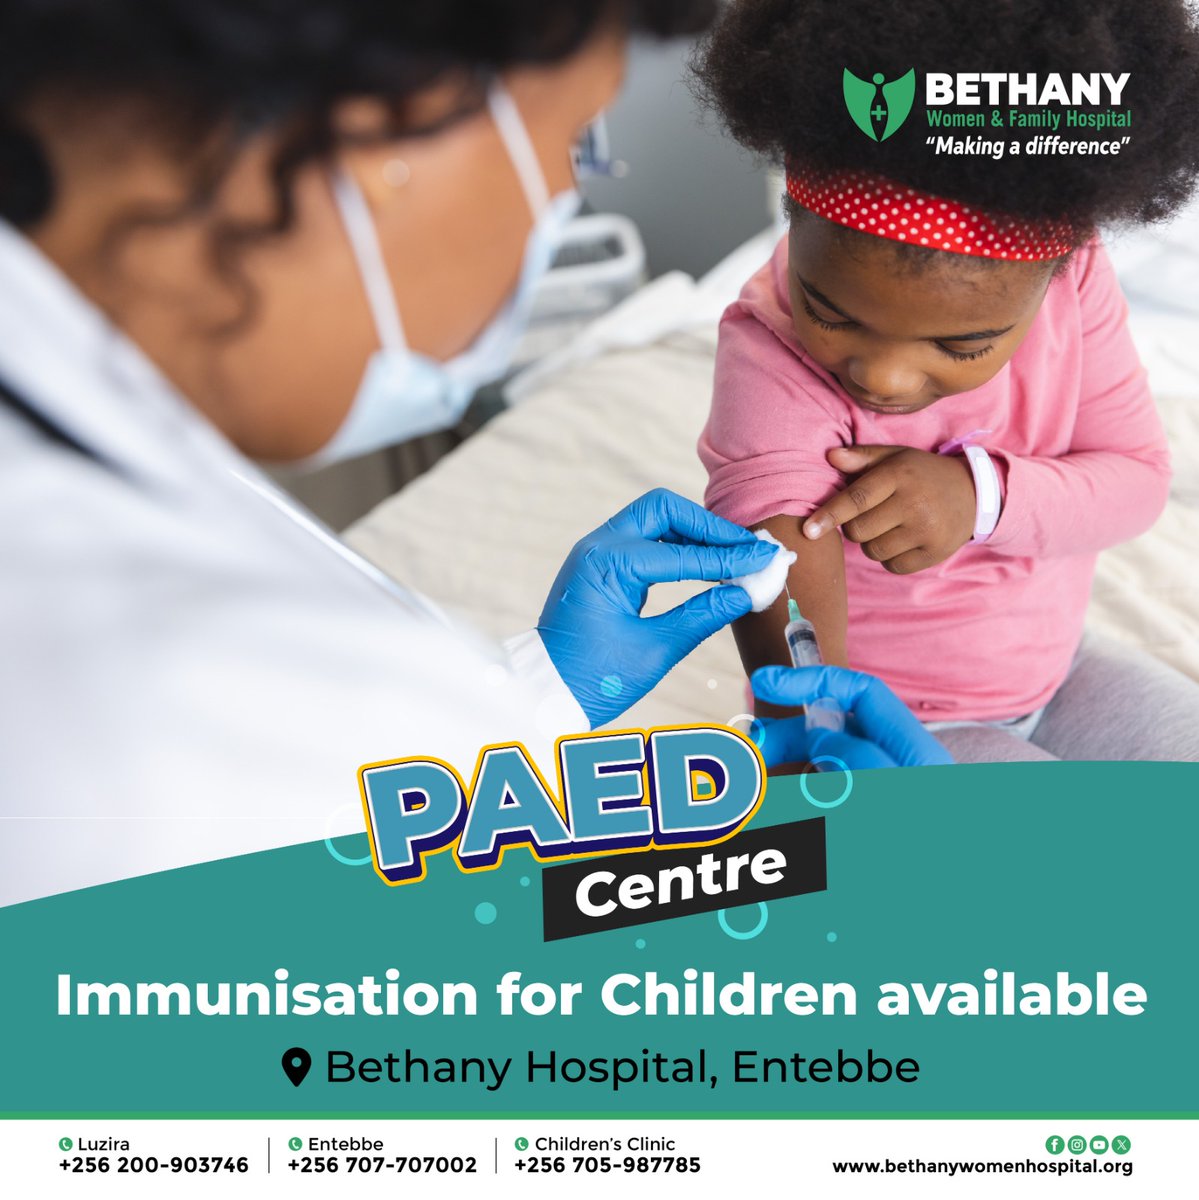 Protect your child against preventable diseases with our Pediatric center's immunization services.

Schedule an appointment today!! #PediatricCare #Immunization #MakingADifference